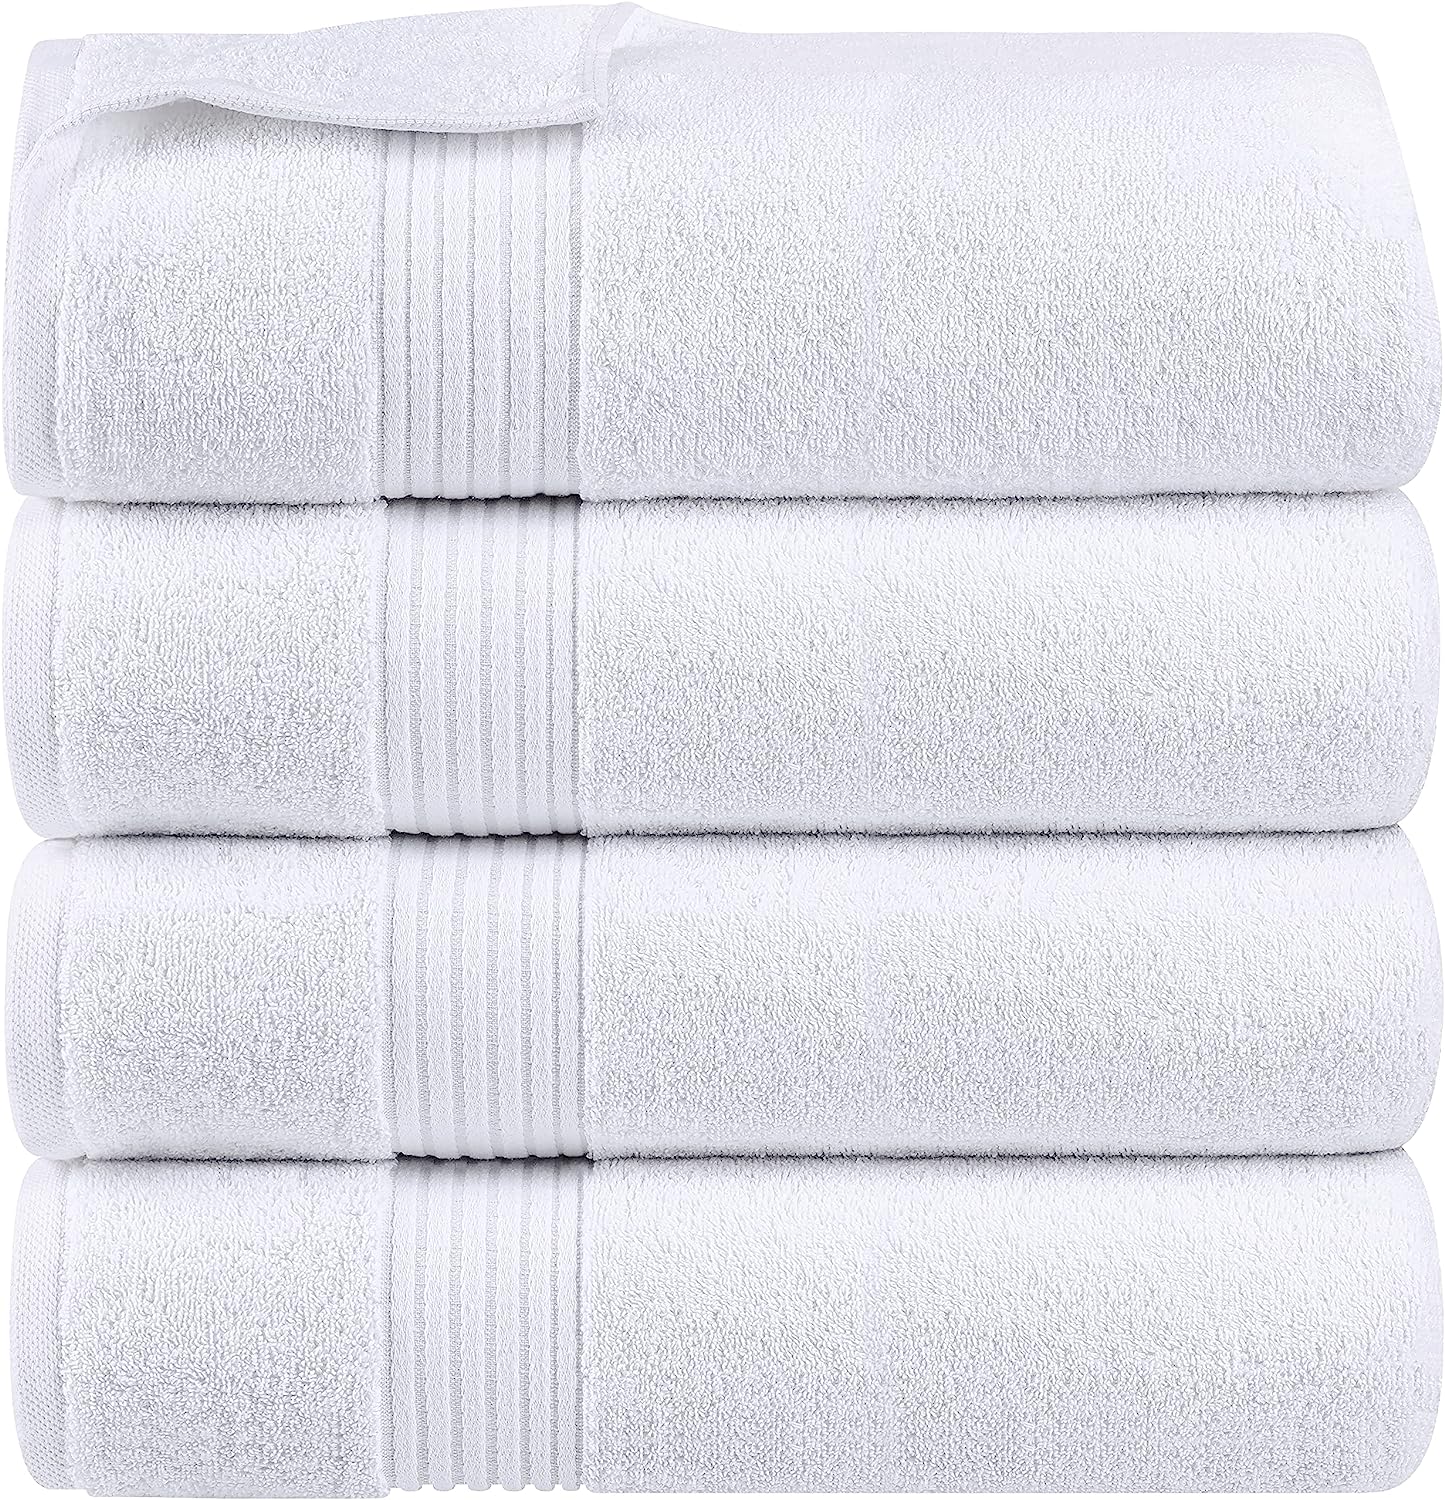  Utopia Towels 6 Pack Small Bath Towel Set, 100% Ring Spun  Cotton (22 x 44 Inches) Lightweight and Highly Absorbent Quick Drying Towels,  Premium Towels for Hotel, Spa and Bathroom (White) 